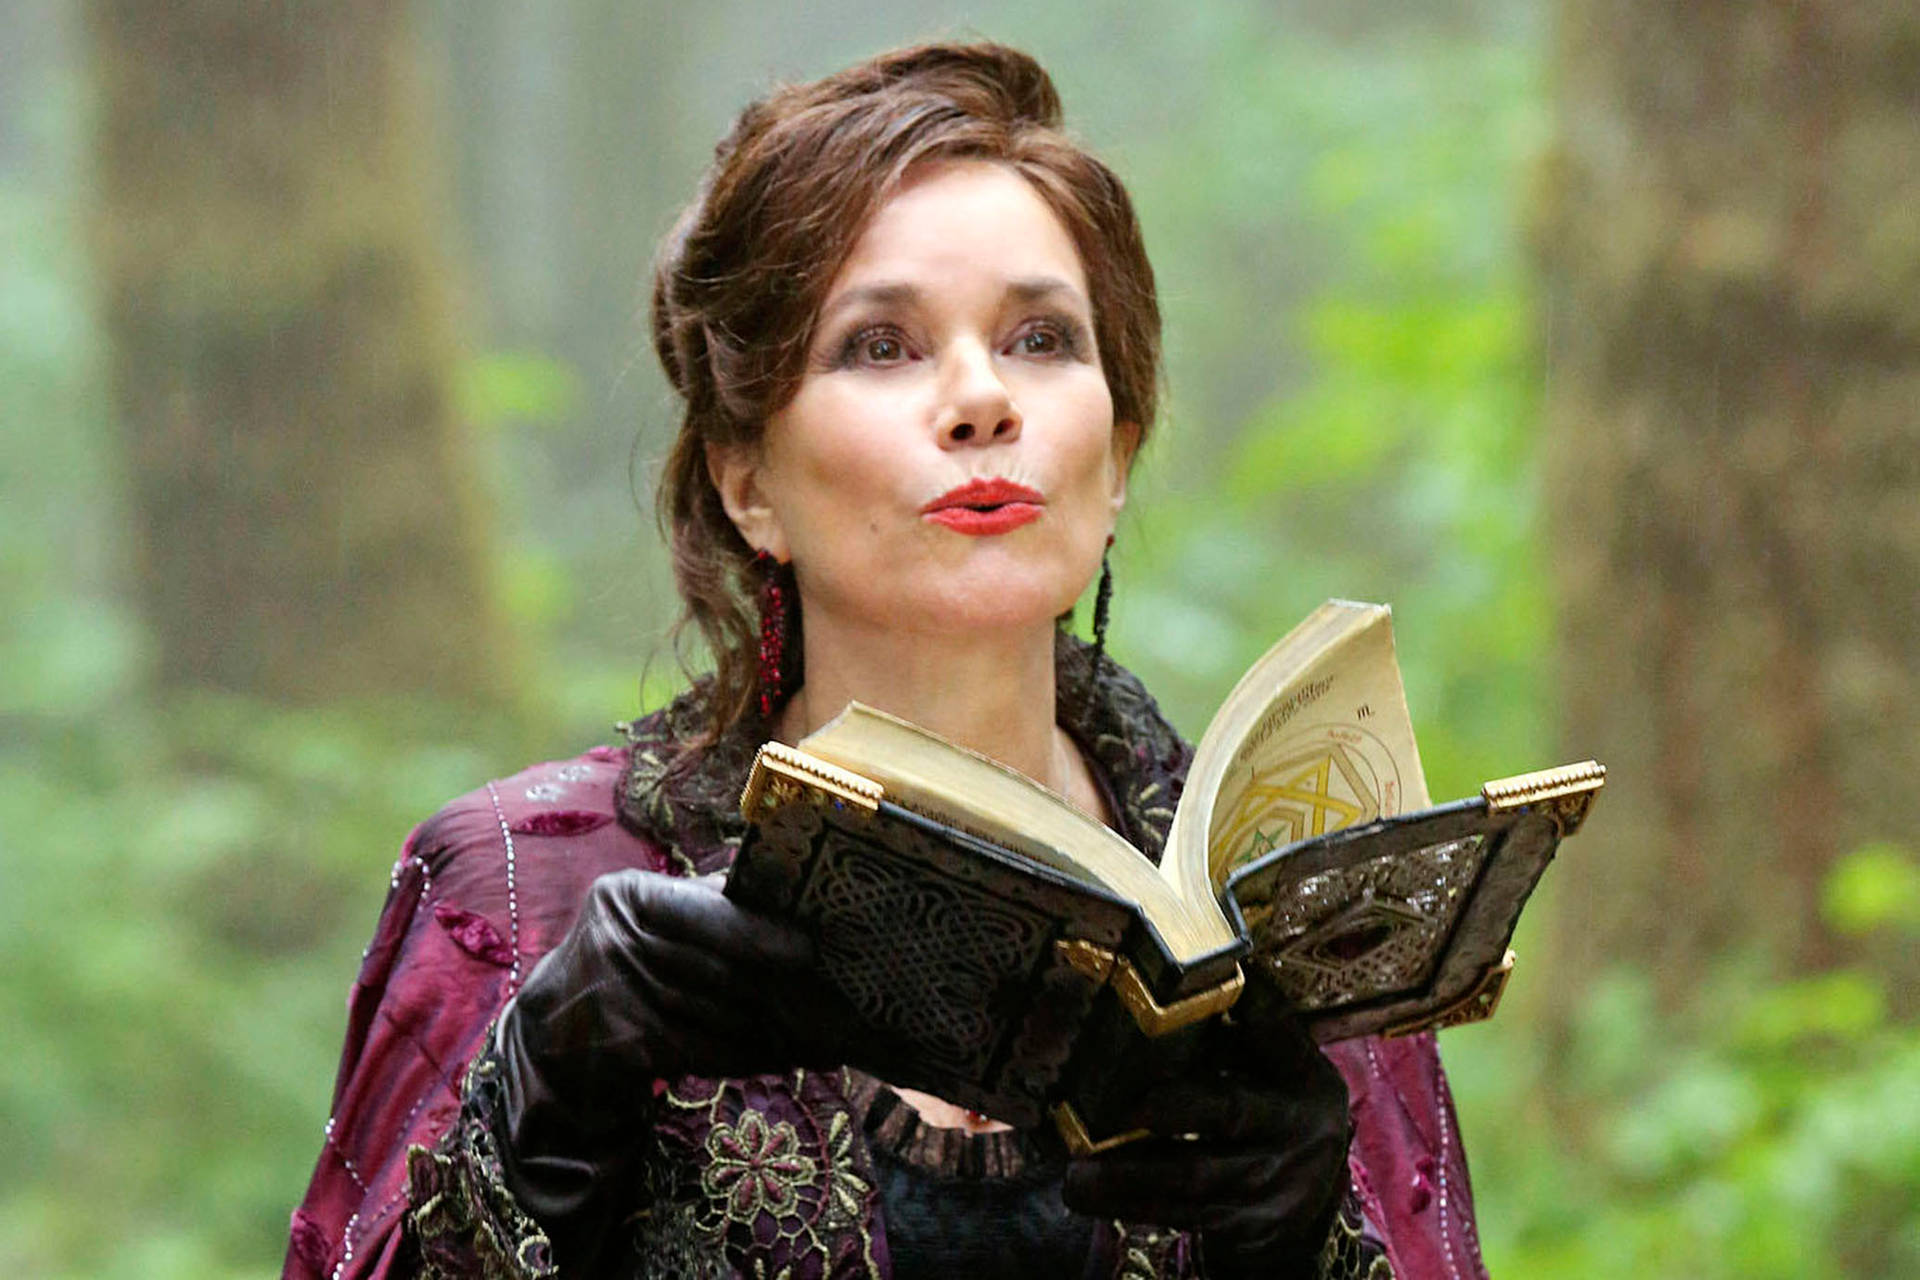 Barbara Hershey in Once Upon a Time - Stunning Profile Shot Wallpaper